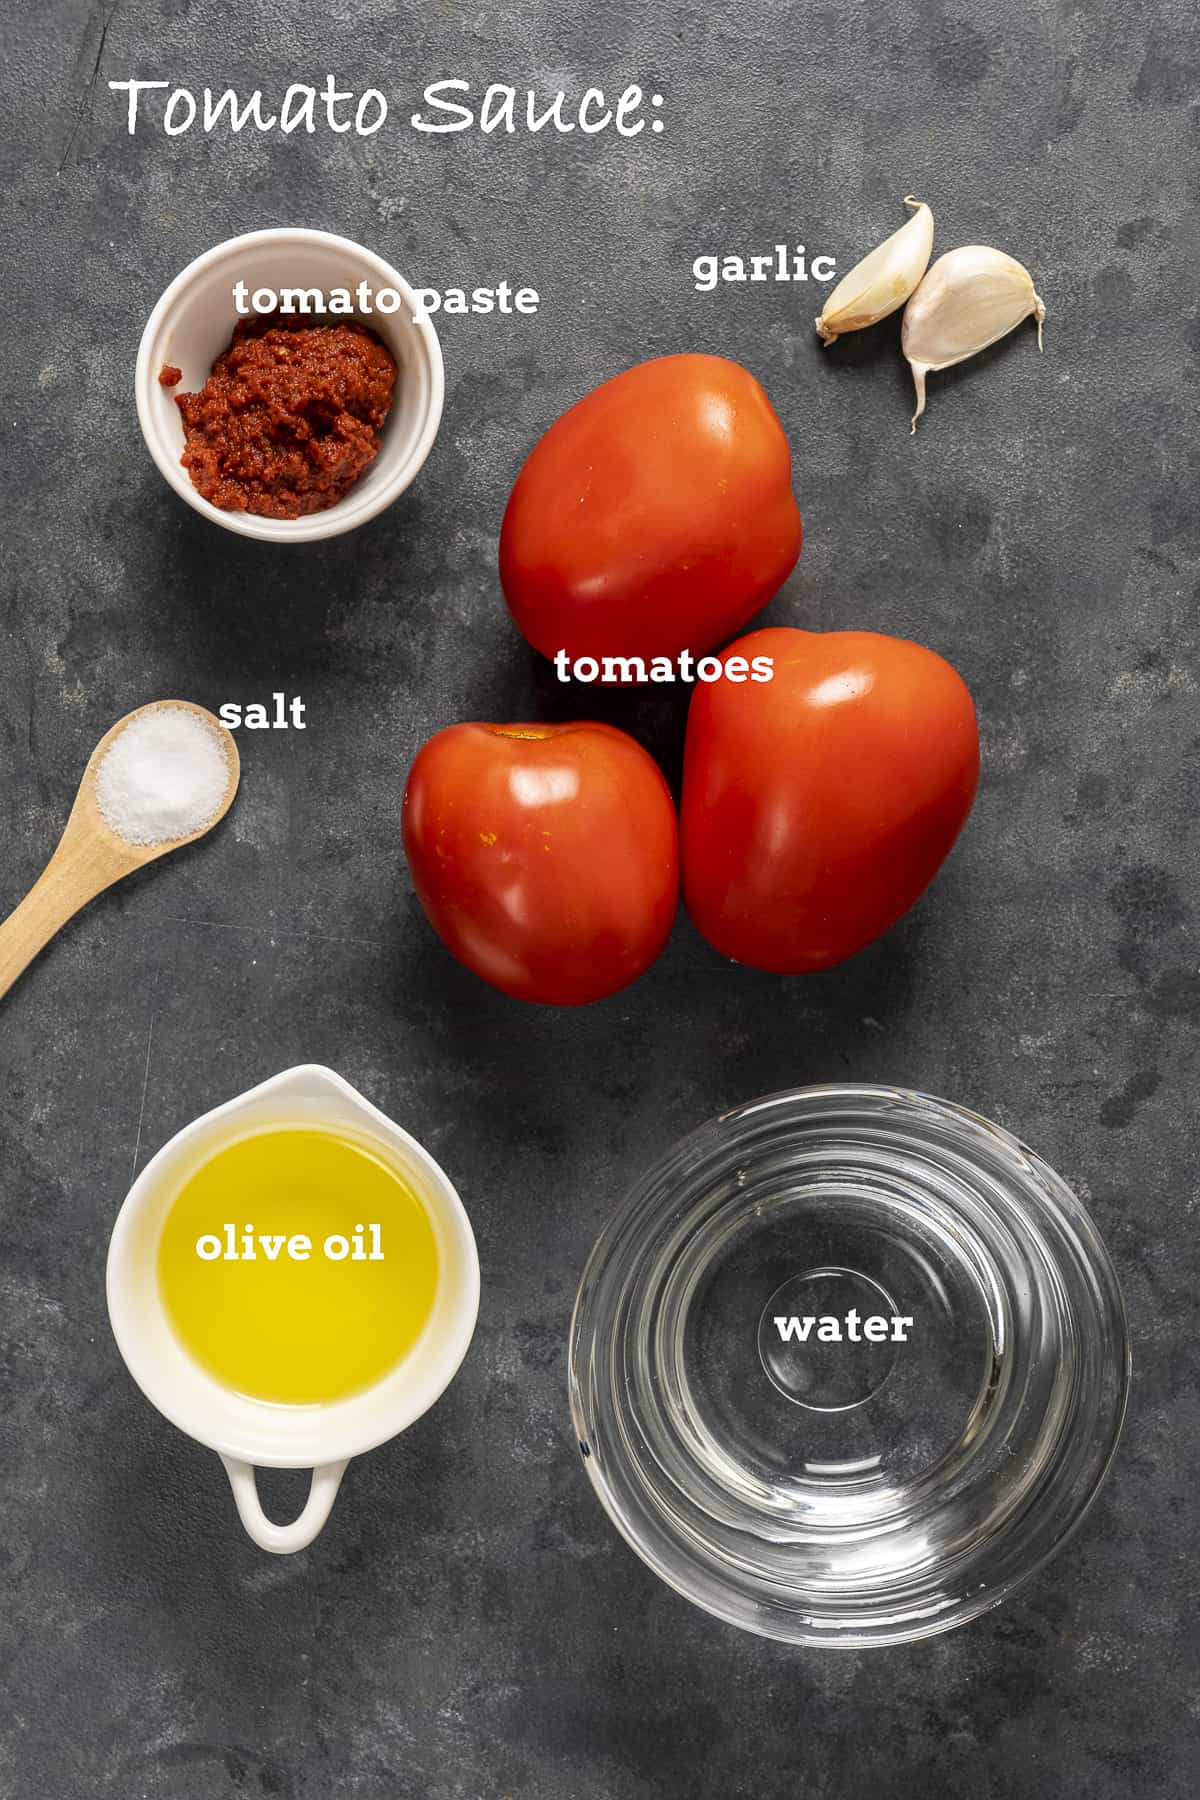 Tomatoes, tomato paste, garlic, olive oil, salt and water on a dark background.